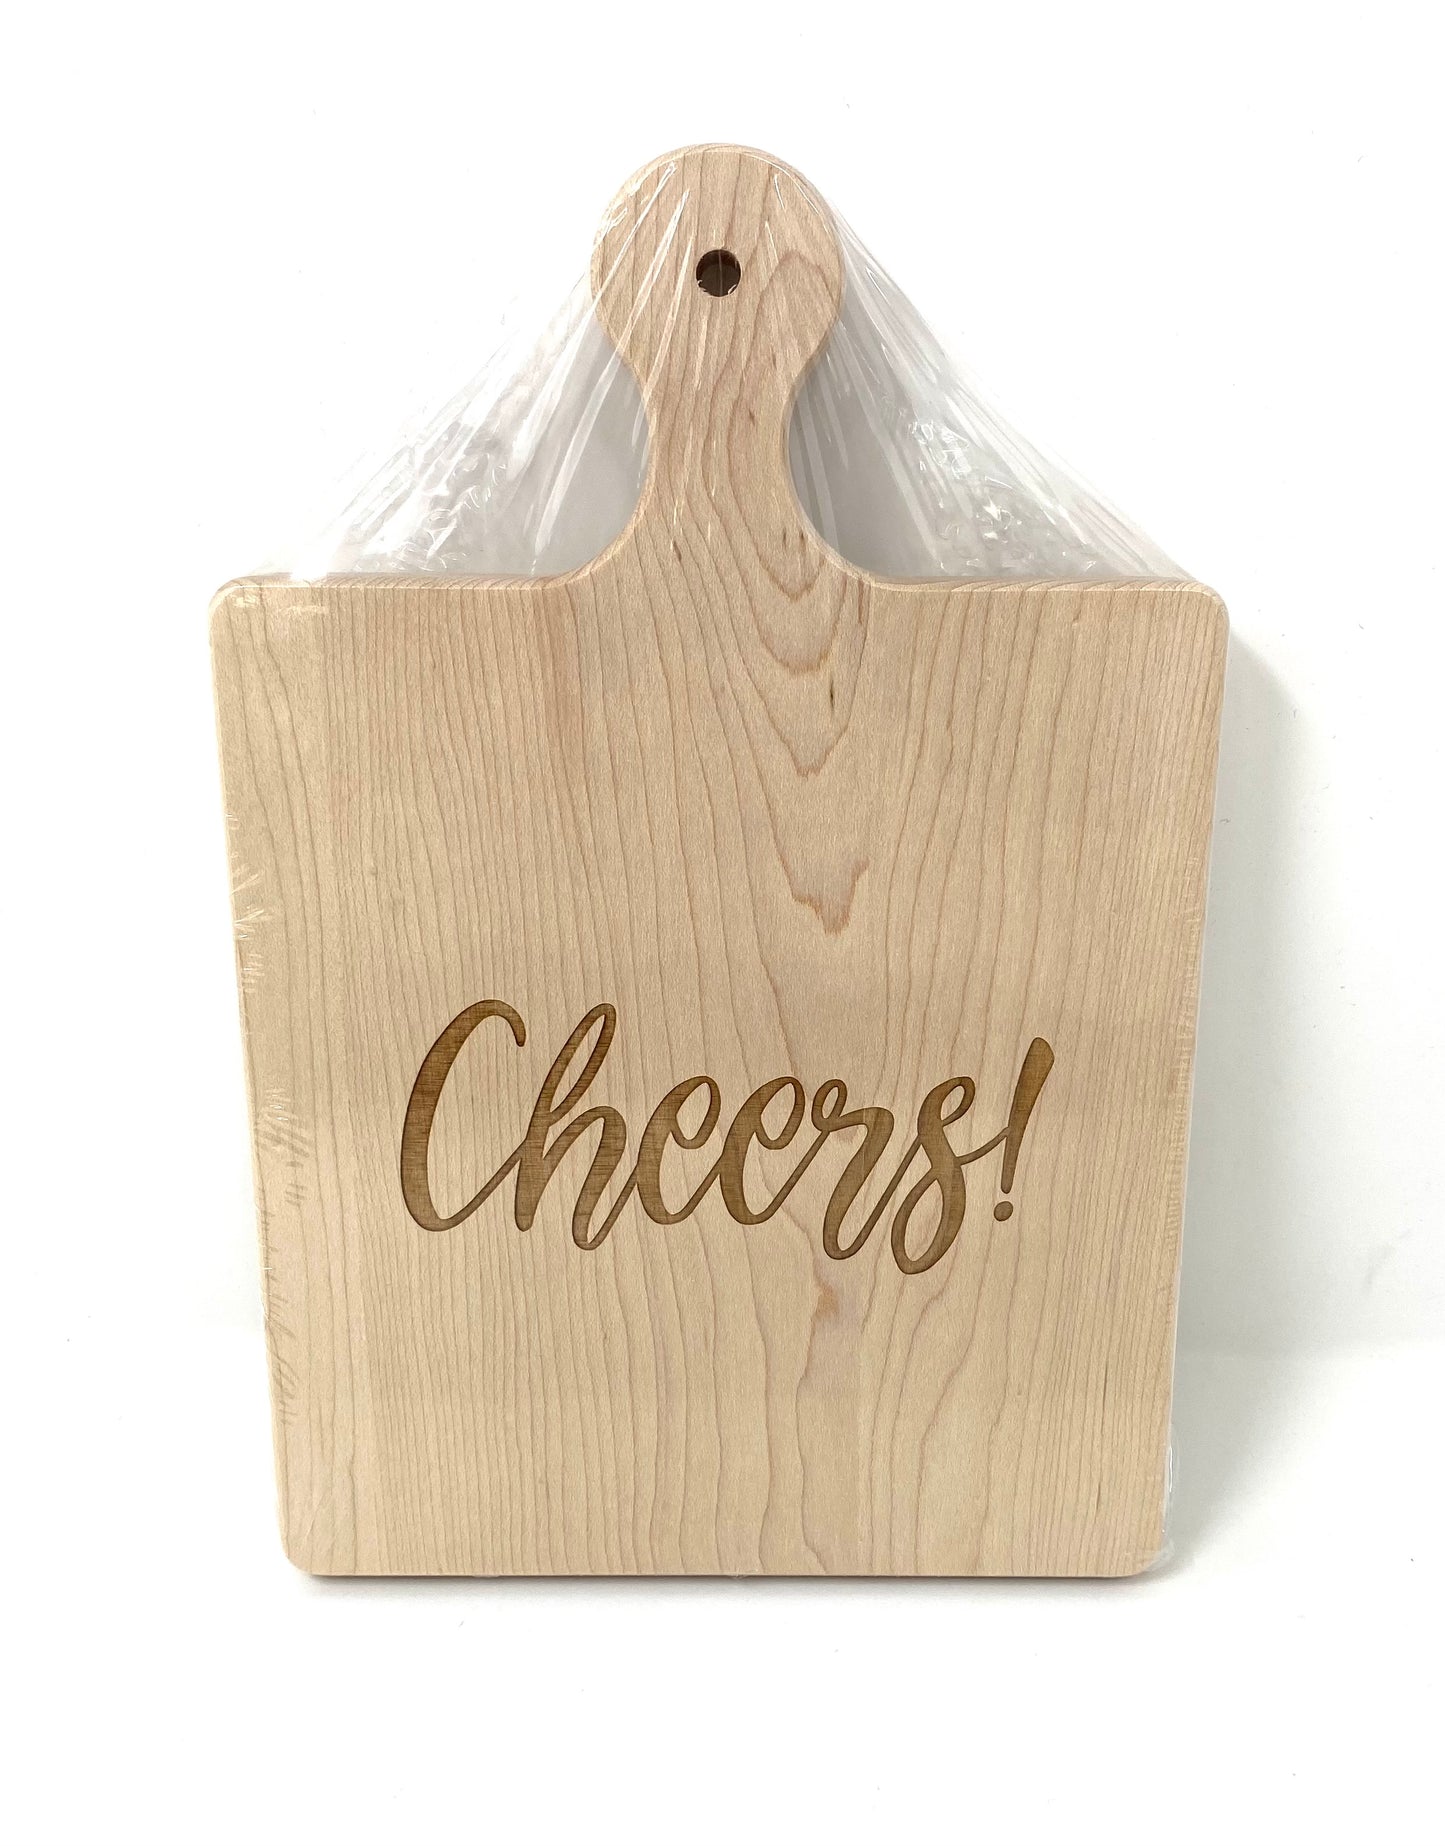 Cheers! Maple Wood Cheeseboard Kitchen + Entertaining Maple Leaf at Home   